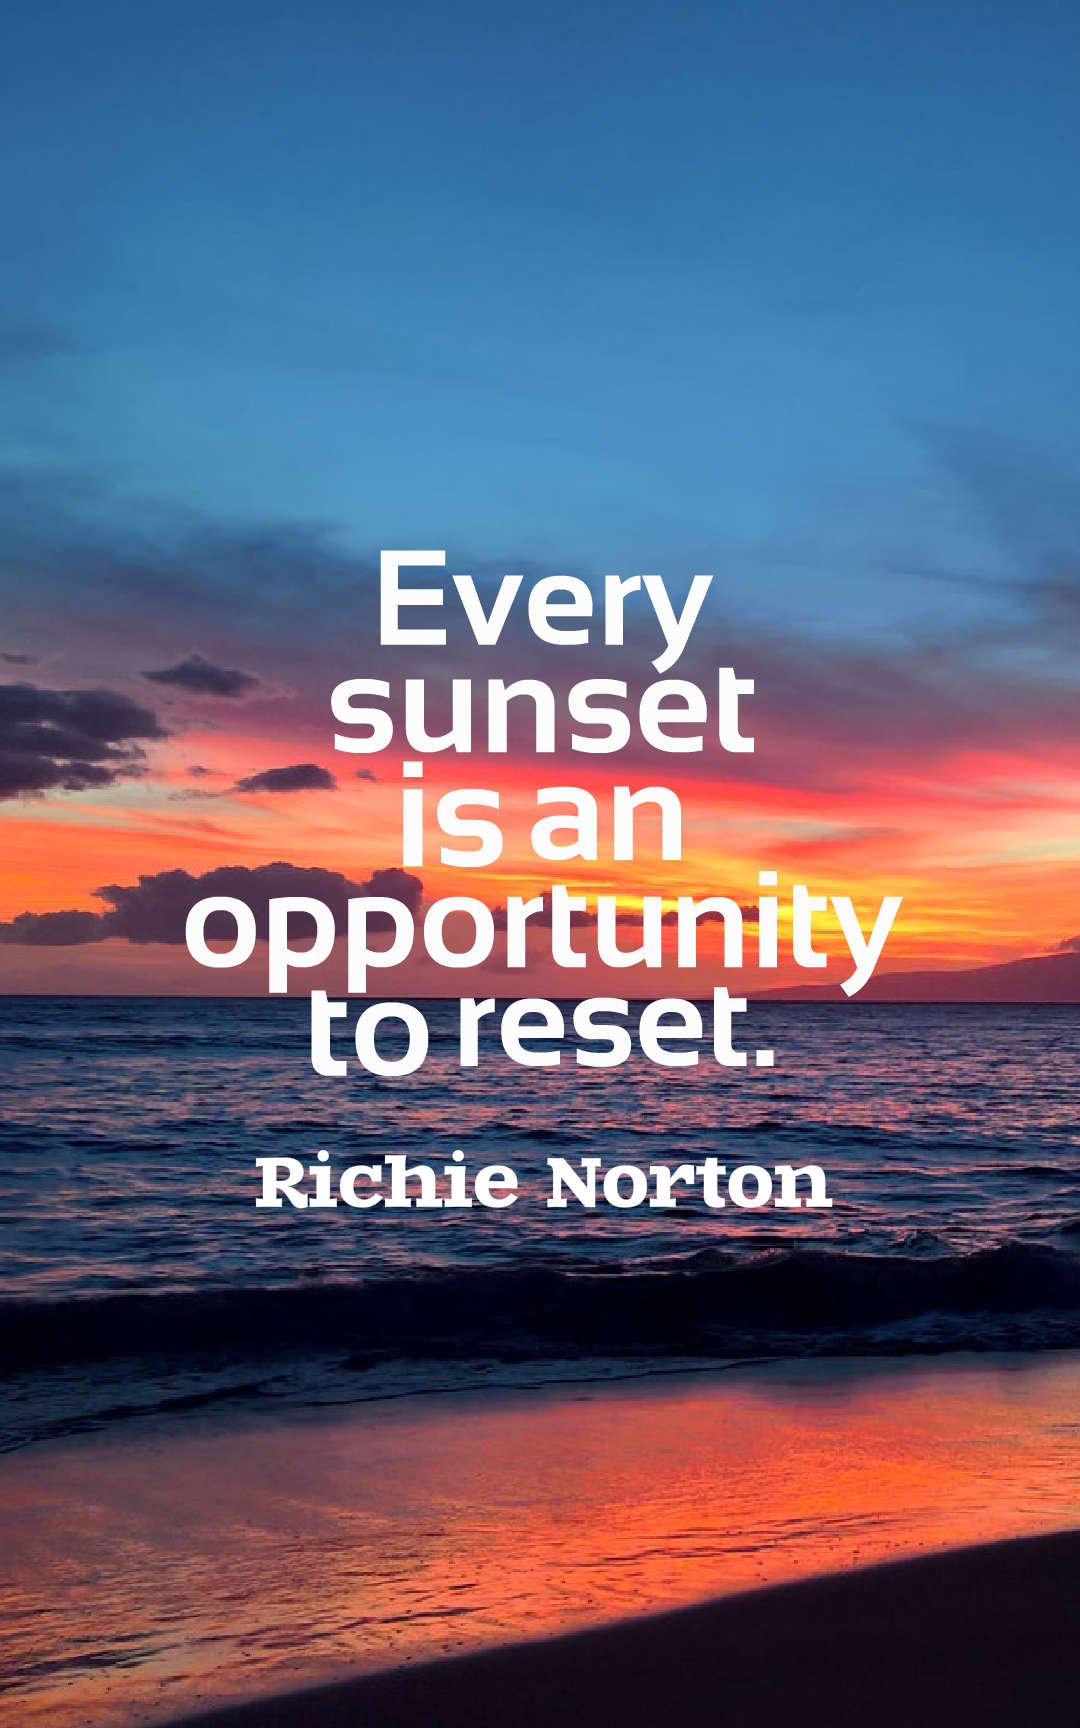 Every sunset is an opportunity to reset.